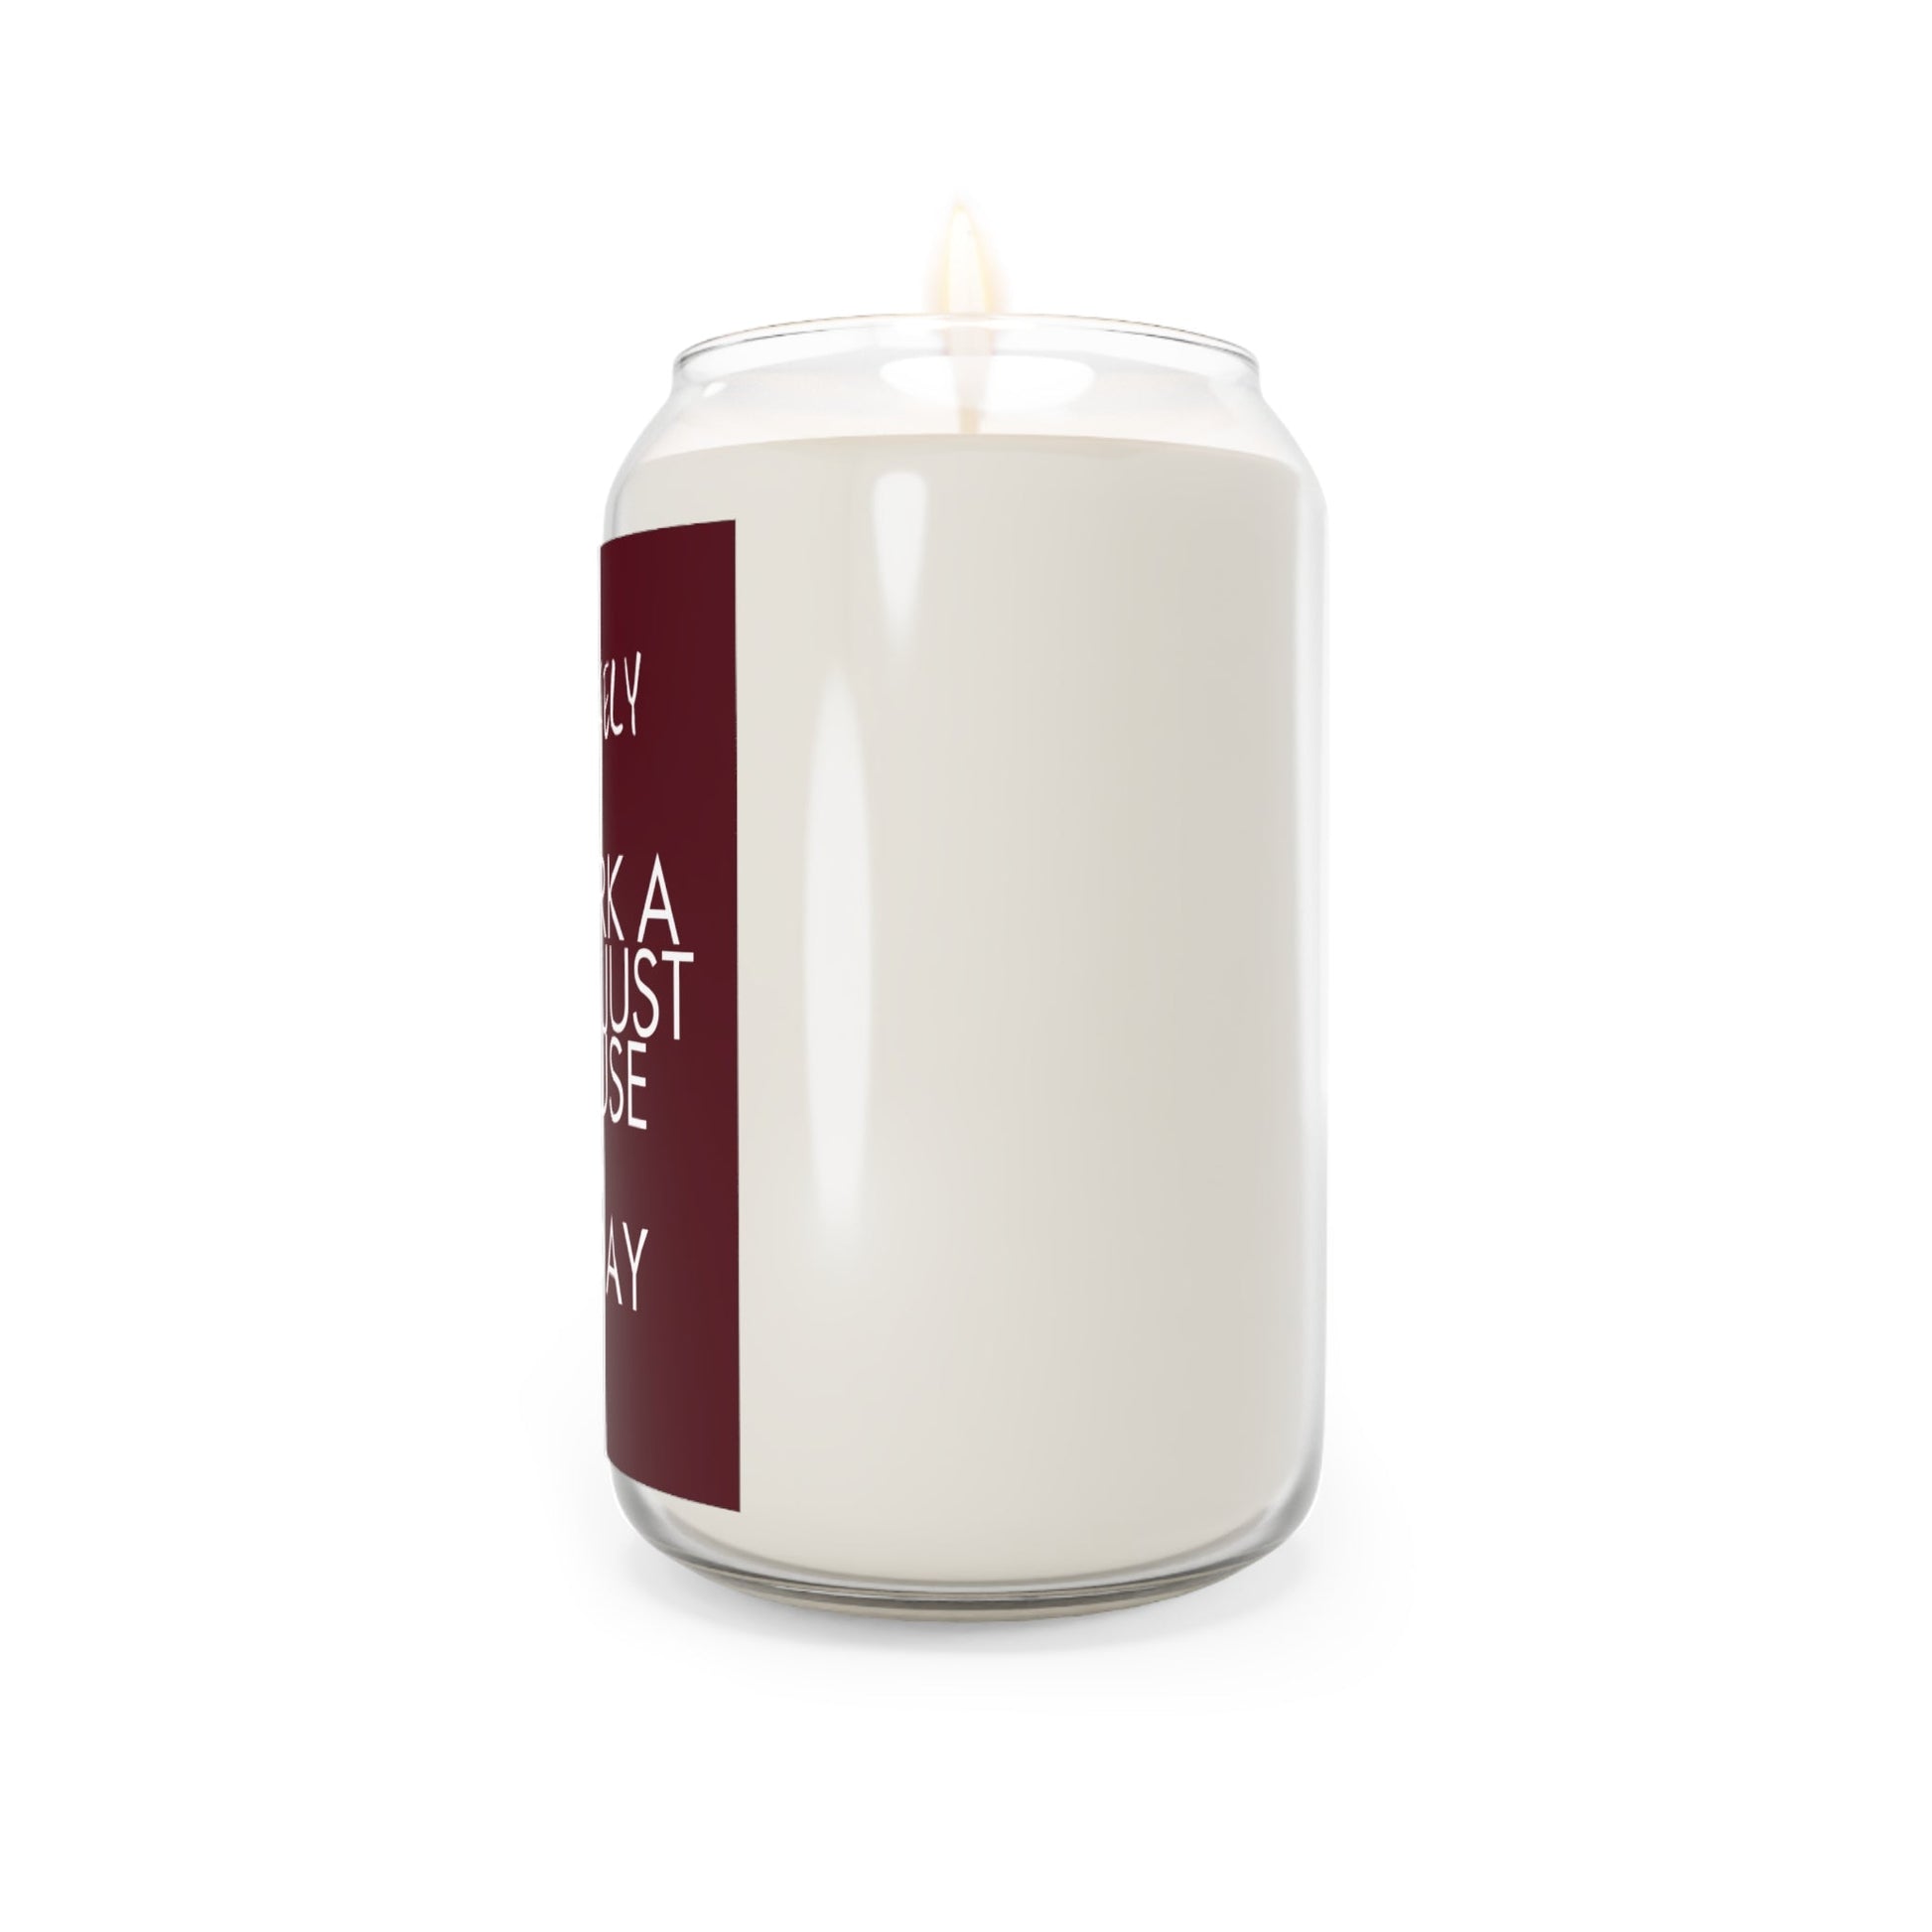 It’s Tuesday Wine Candle - Home Decor